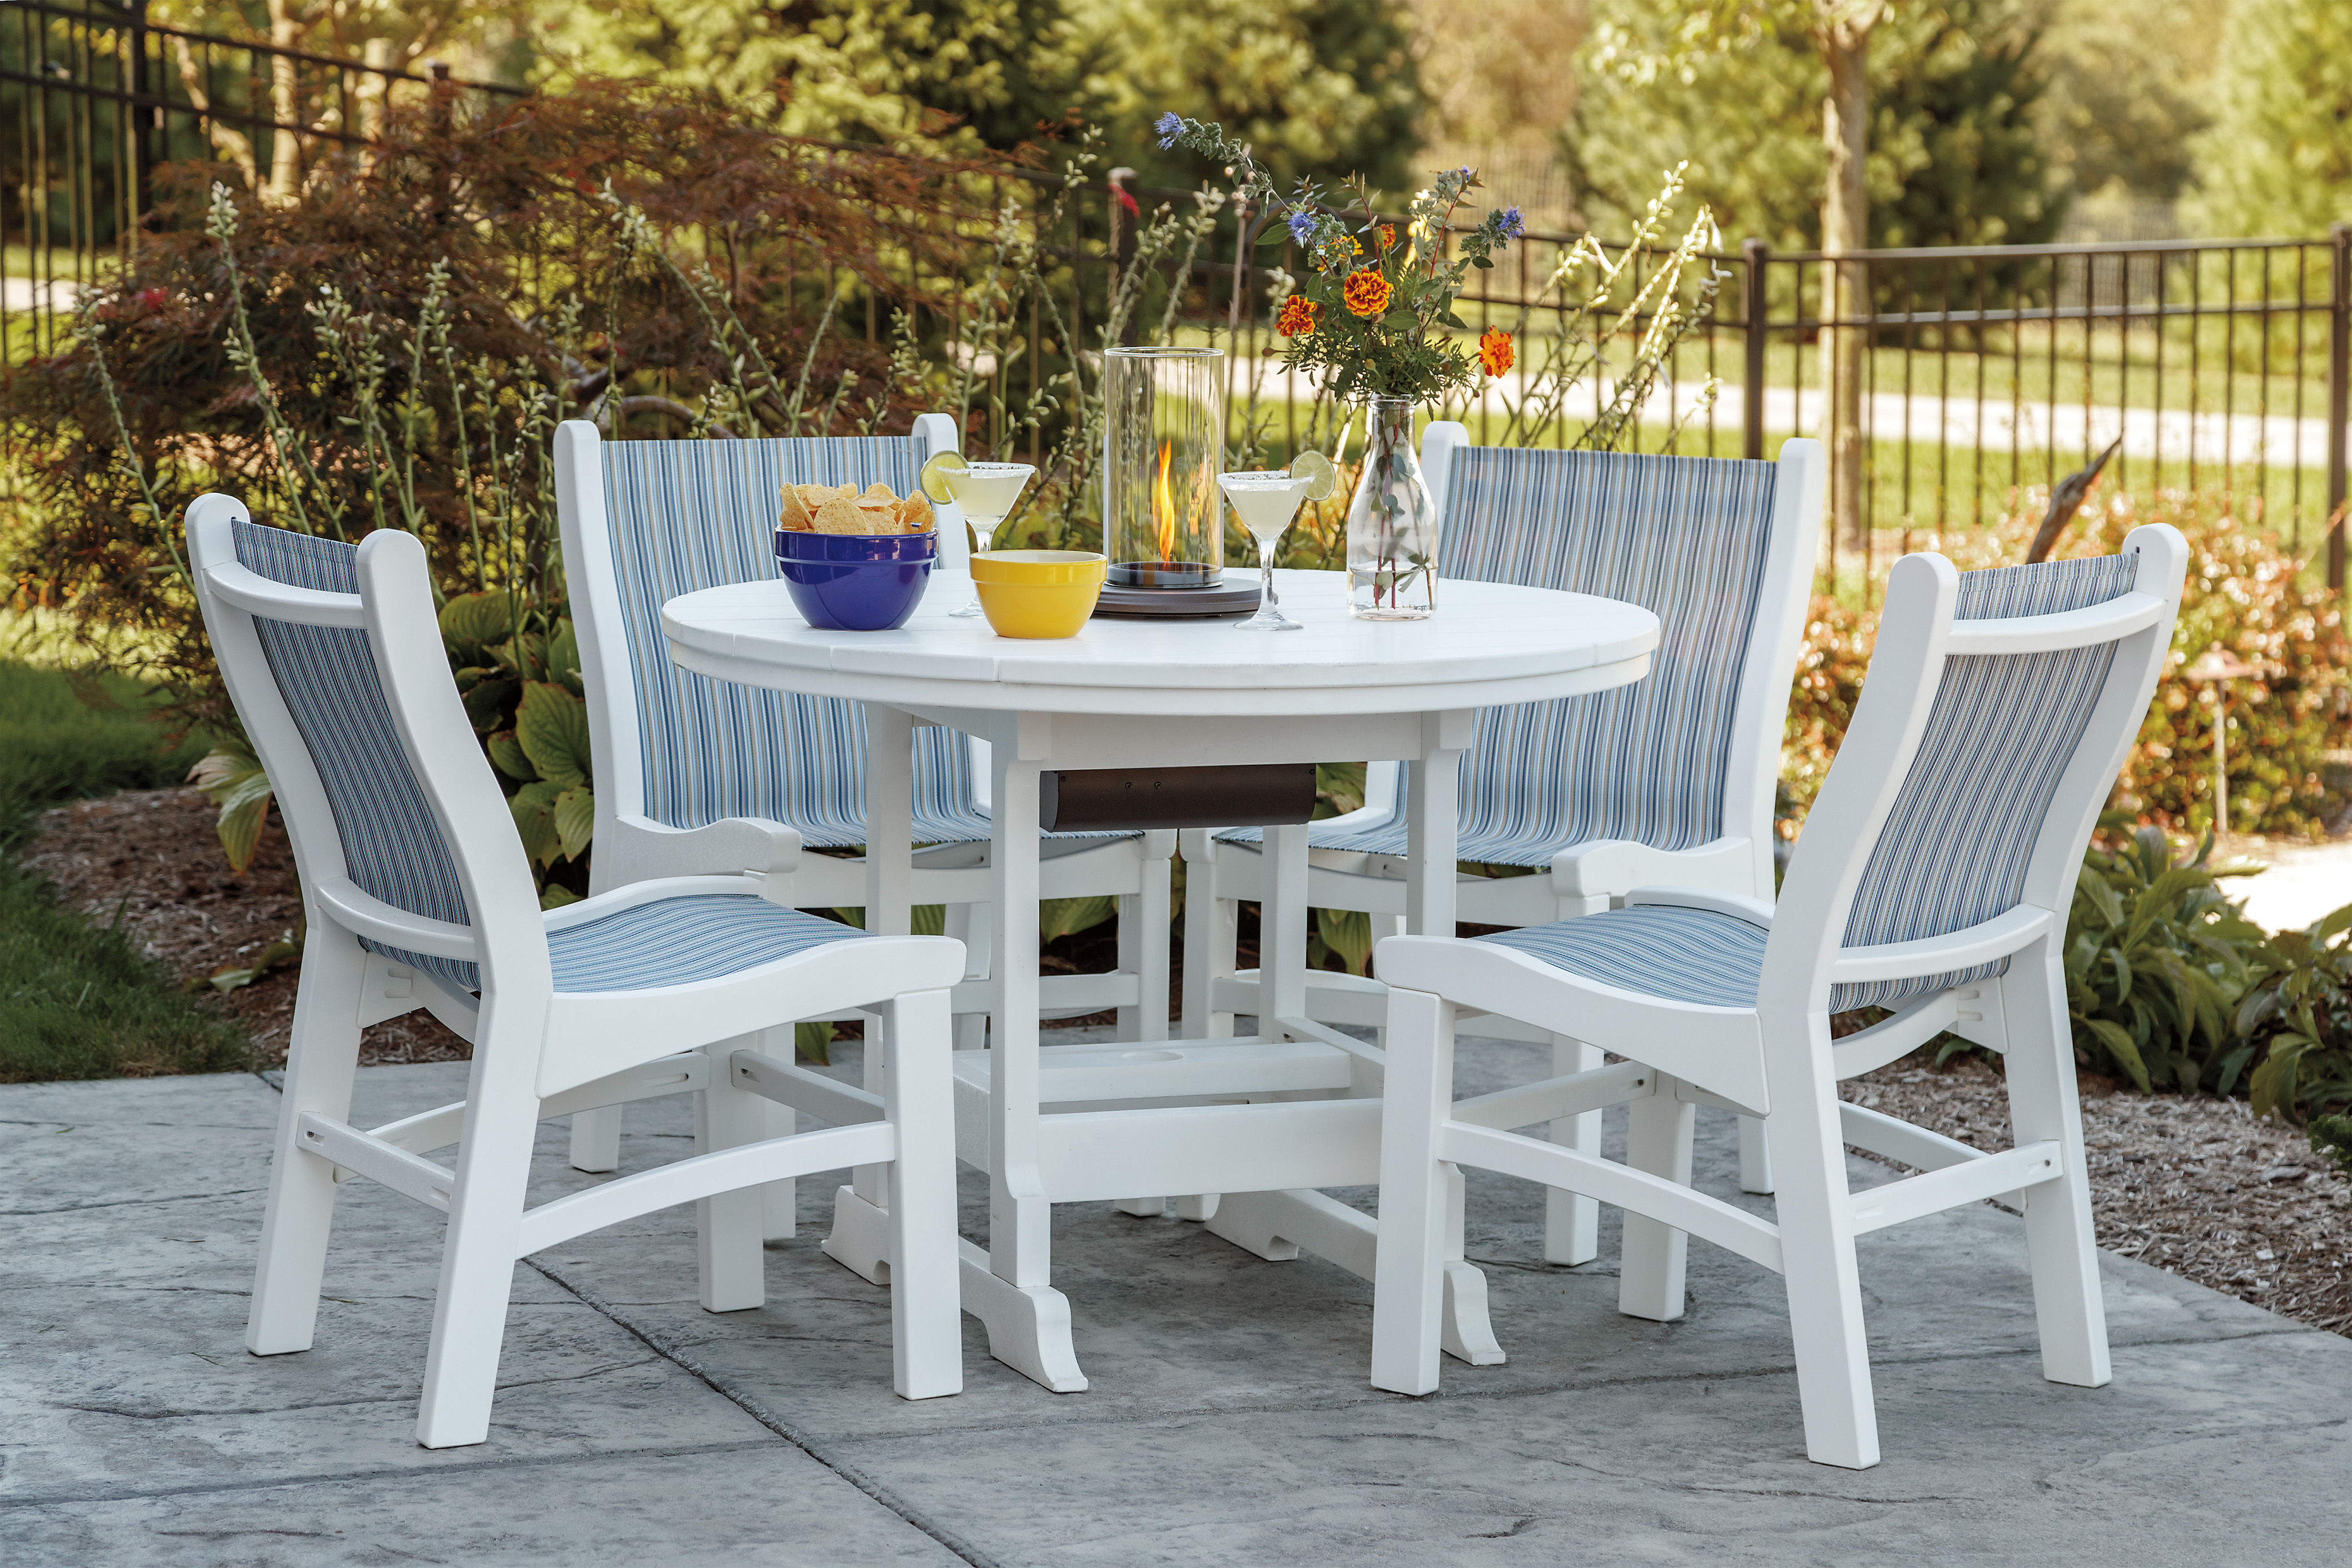 Sling Chairs come in a variety of fabric choices, shown here with Round Dining Table.